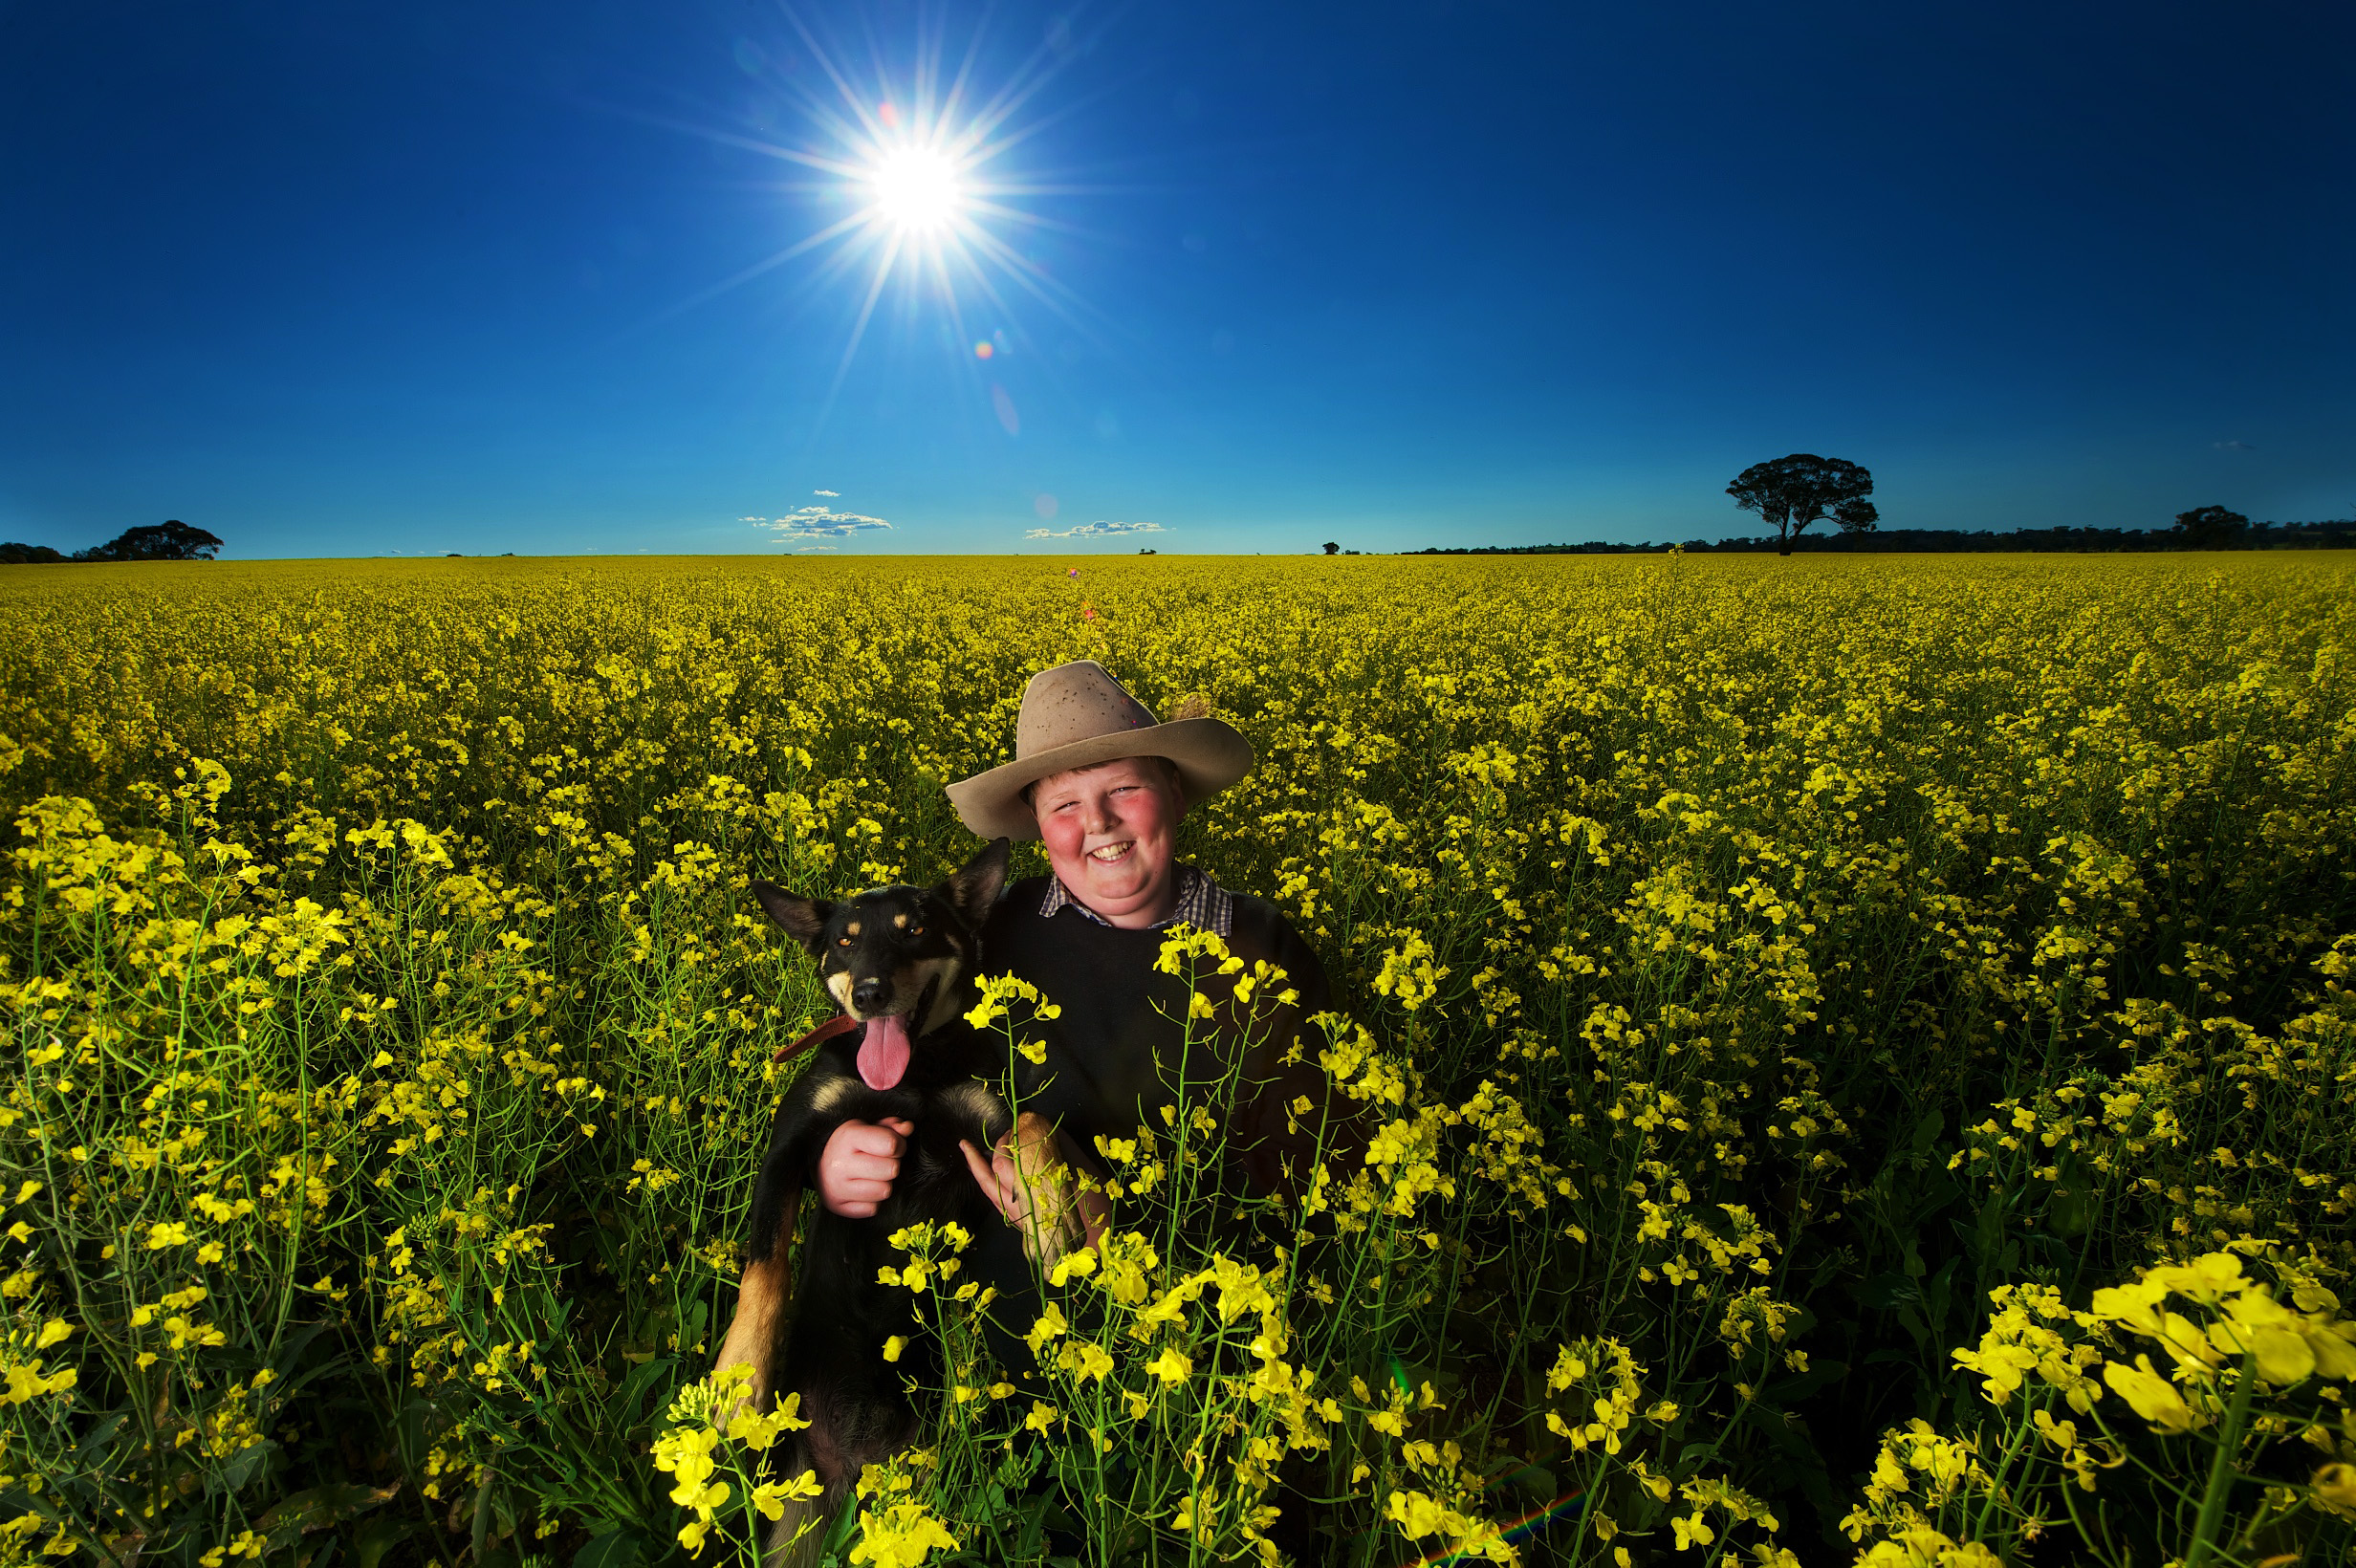 CHP_Export_91422582_HS25 We%27re for Victoria Tom Punton 13 with Zoe in  canola fields on his fami.jpg